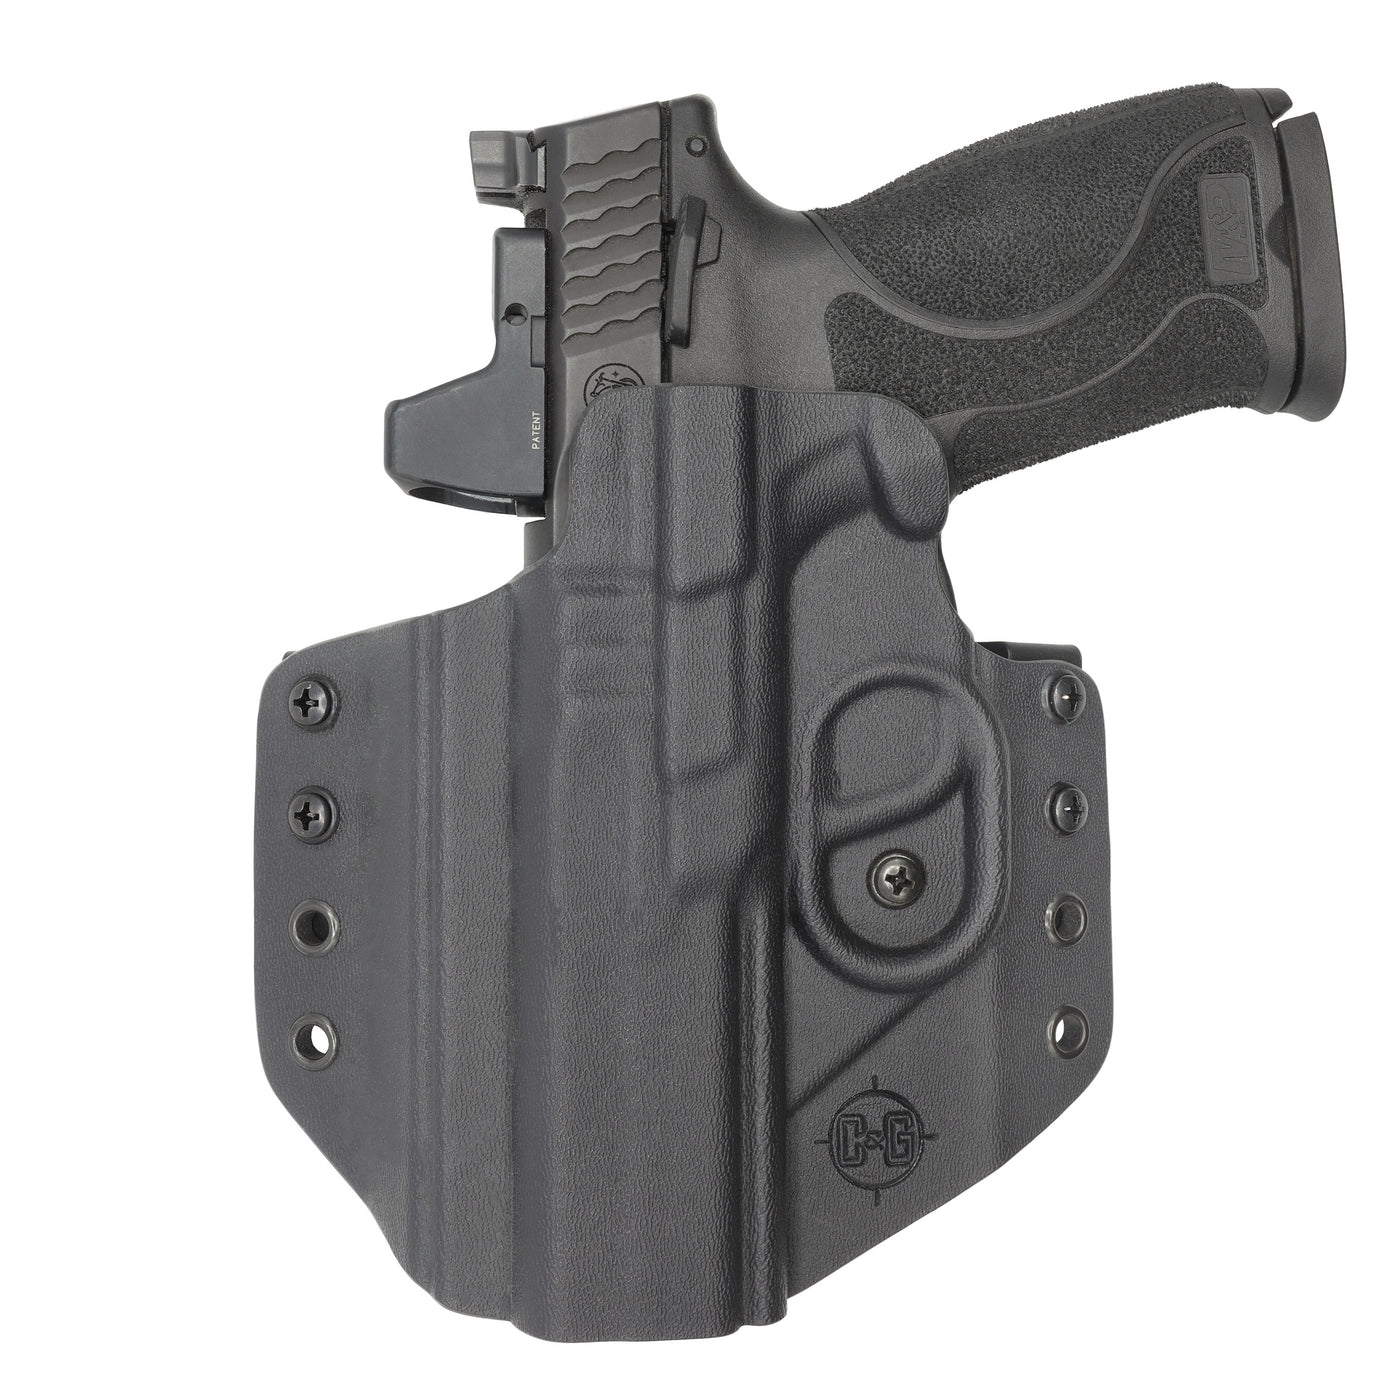 C&G Holsters quickship OWB Covert S&W M&P 10/45 4.6" LEFT HAND in holstered position